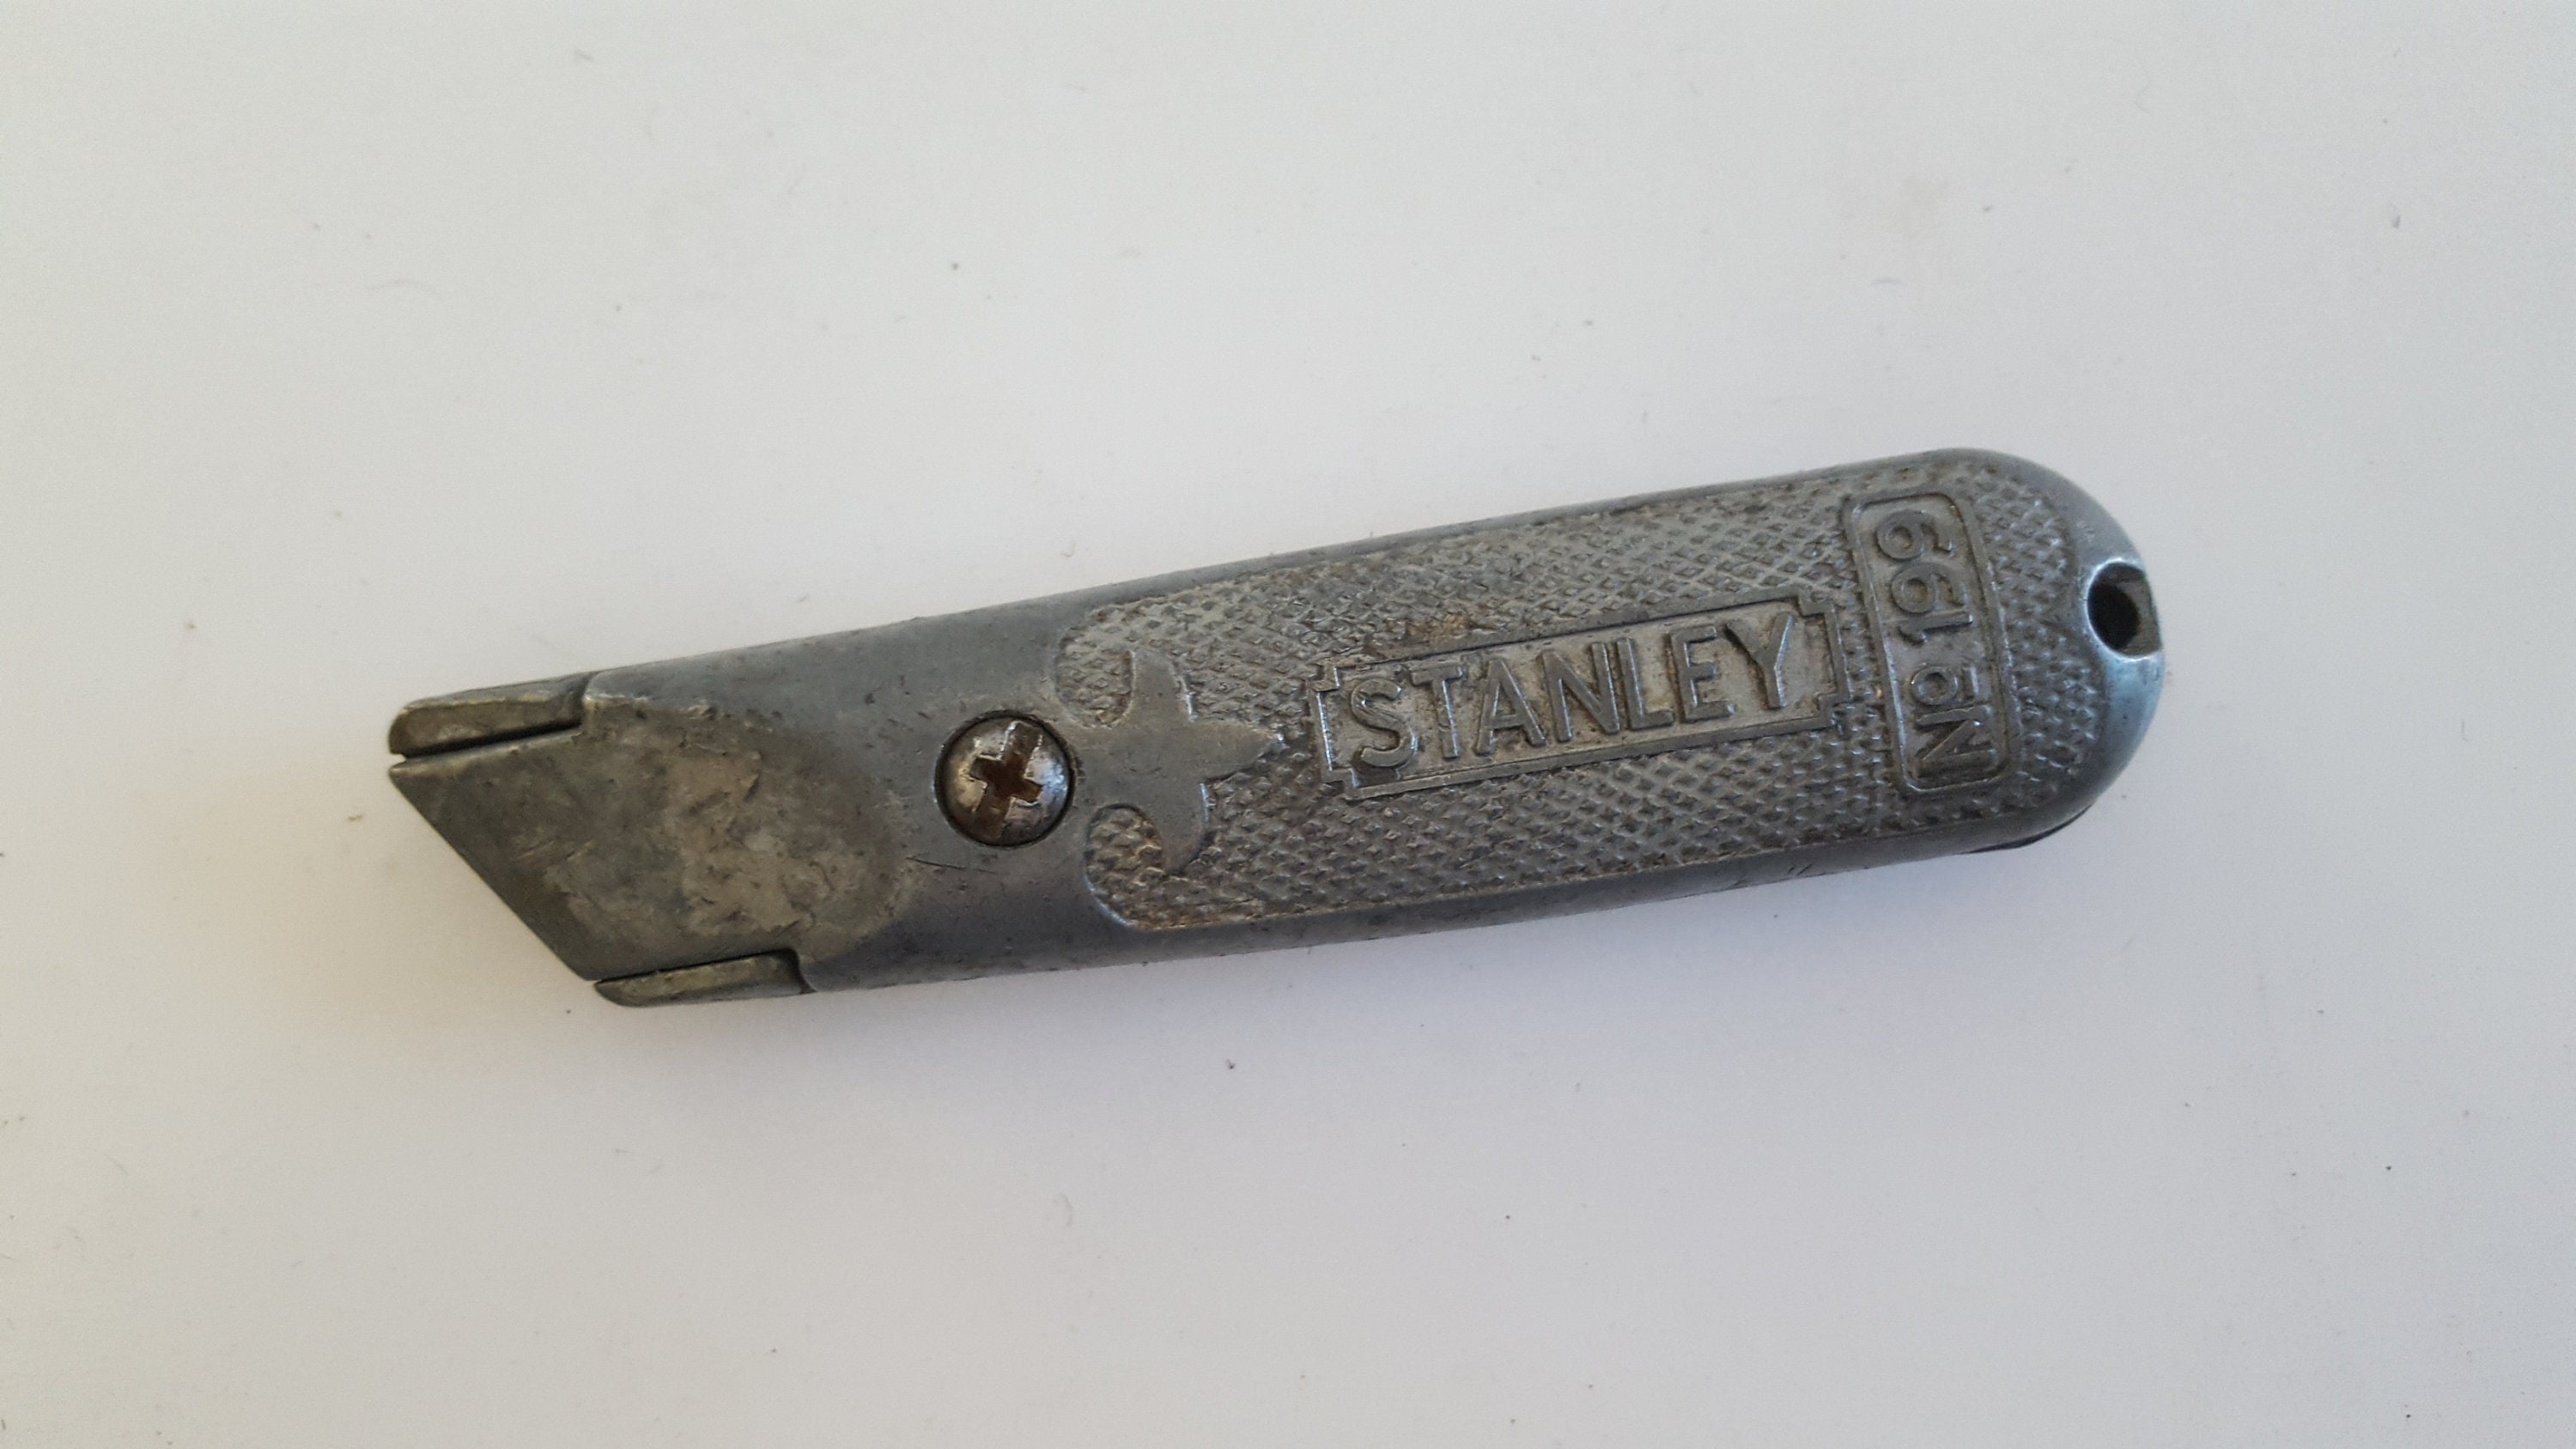 Vintage Circa Late 1960's Stanley No.199 Utility Knife, Original Aluminum,  Good Lightly Cleaned Condition Blades Can Be Stored Inside 